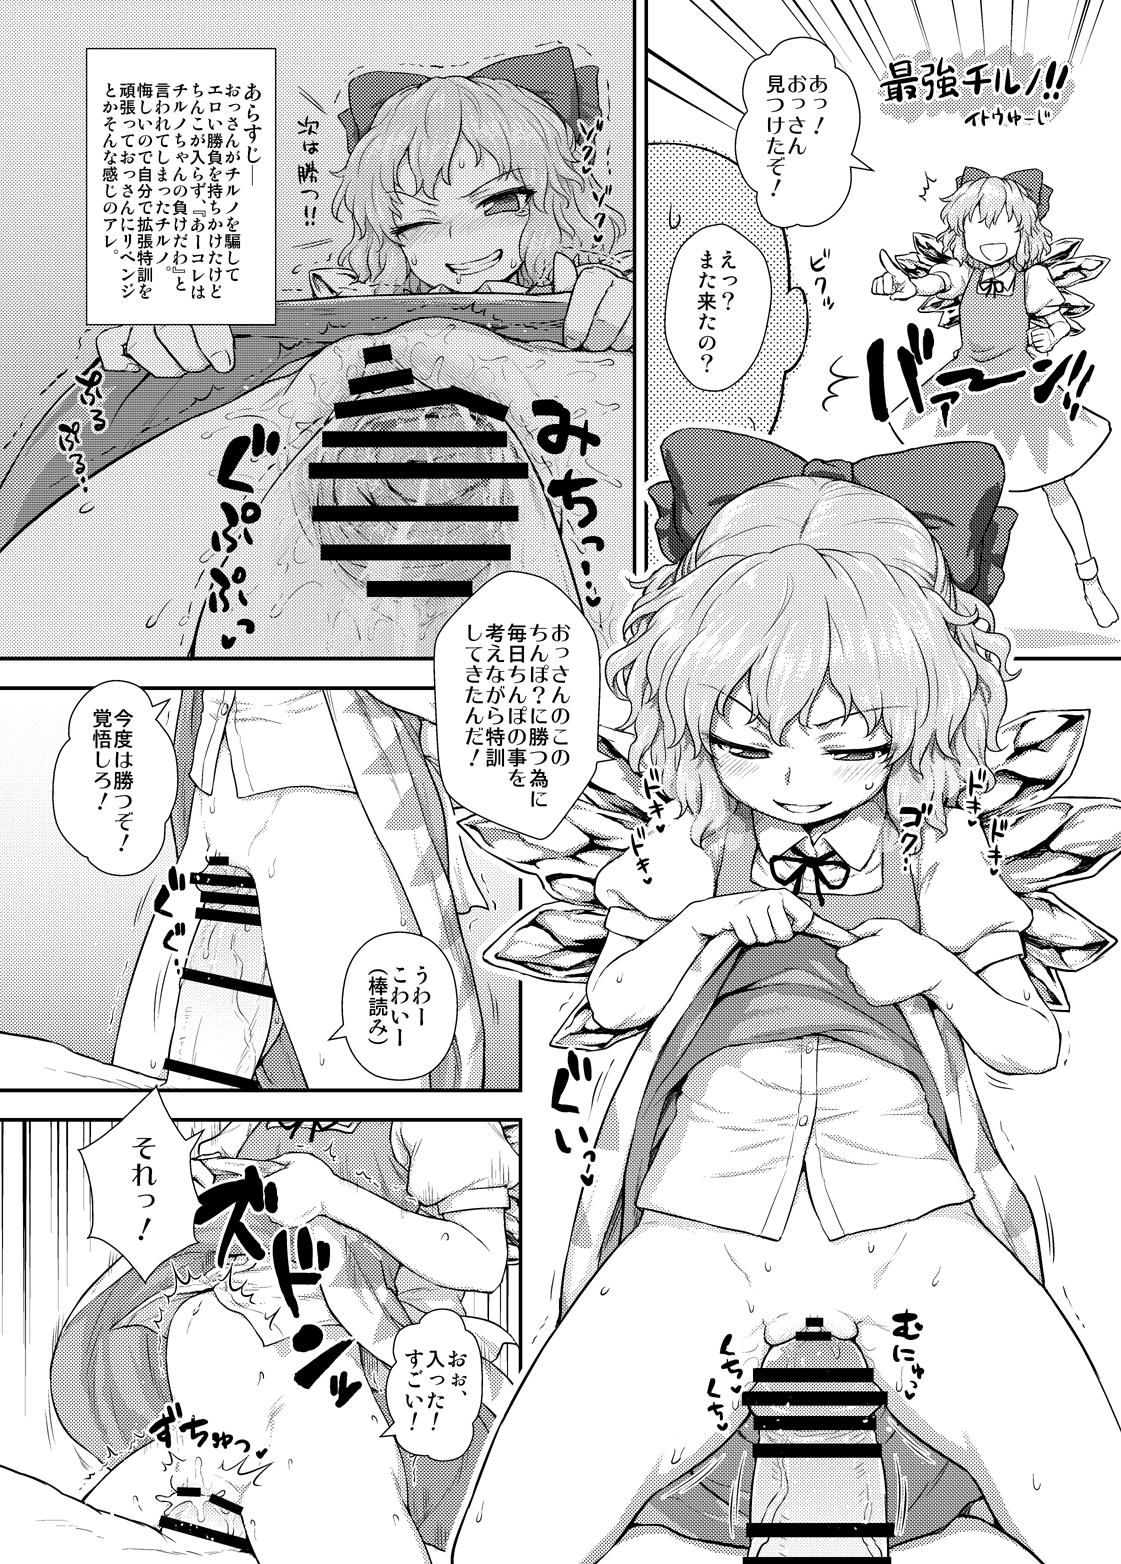 Nalgona 『東方子宮脱合同誌』 - Touhou project Sexcams - Picture 1